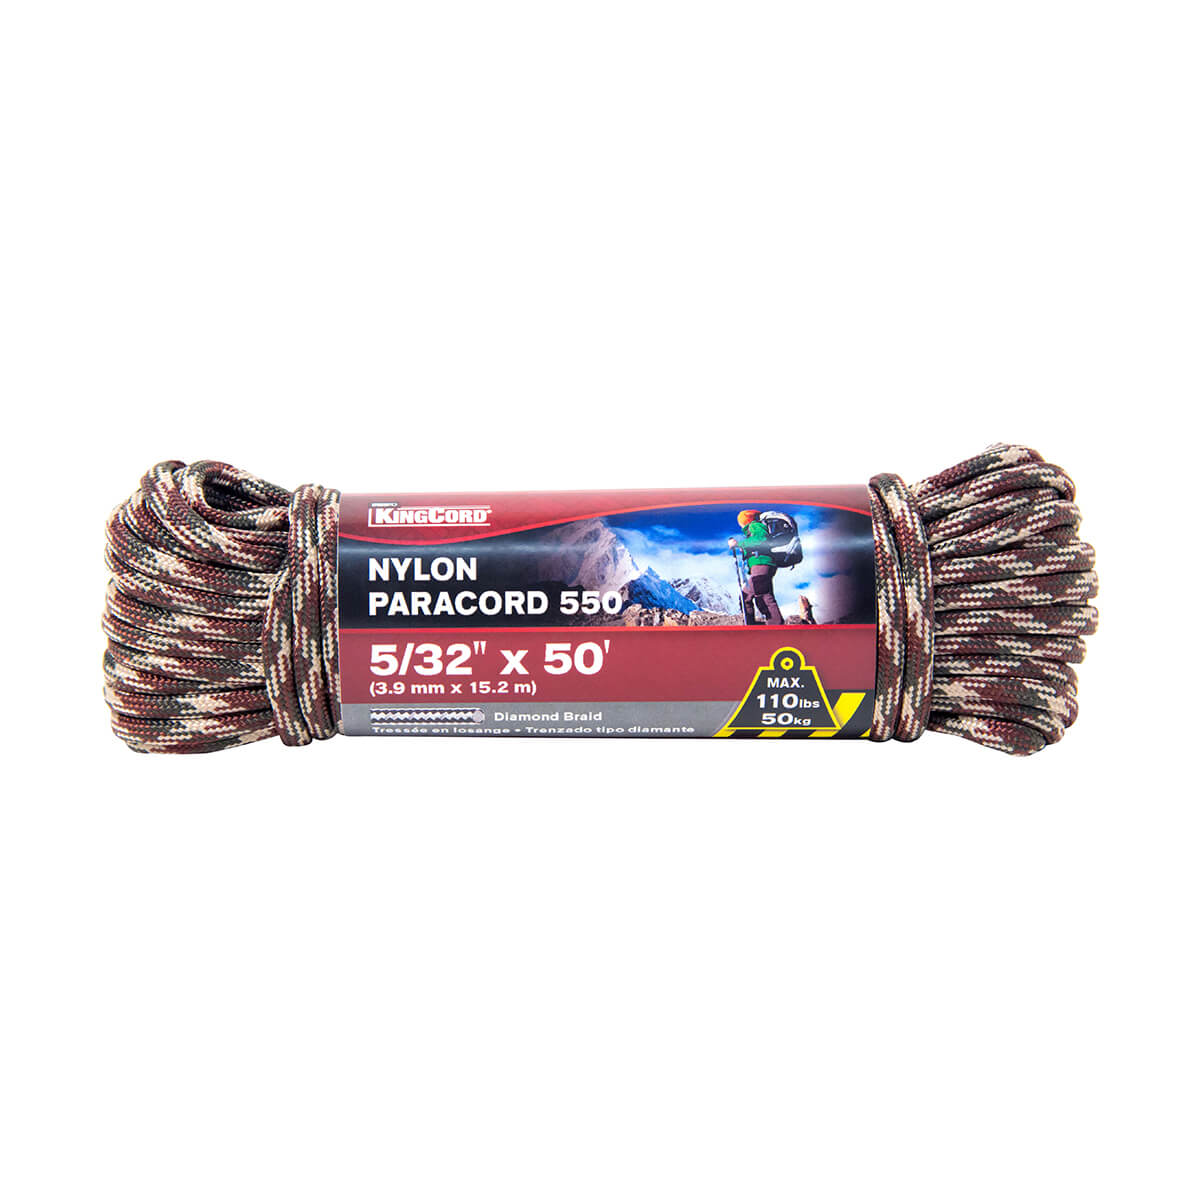 Camouflage Paracord 550 Nylon Diamond Braid Rope - 5/32-in x 50-ft